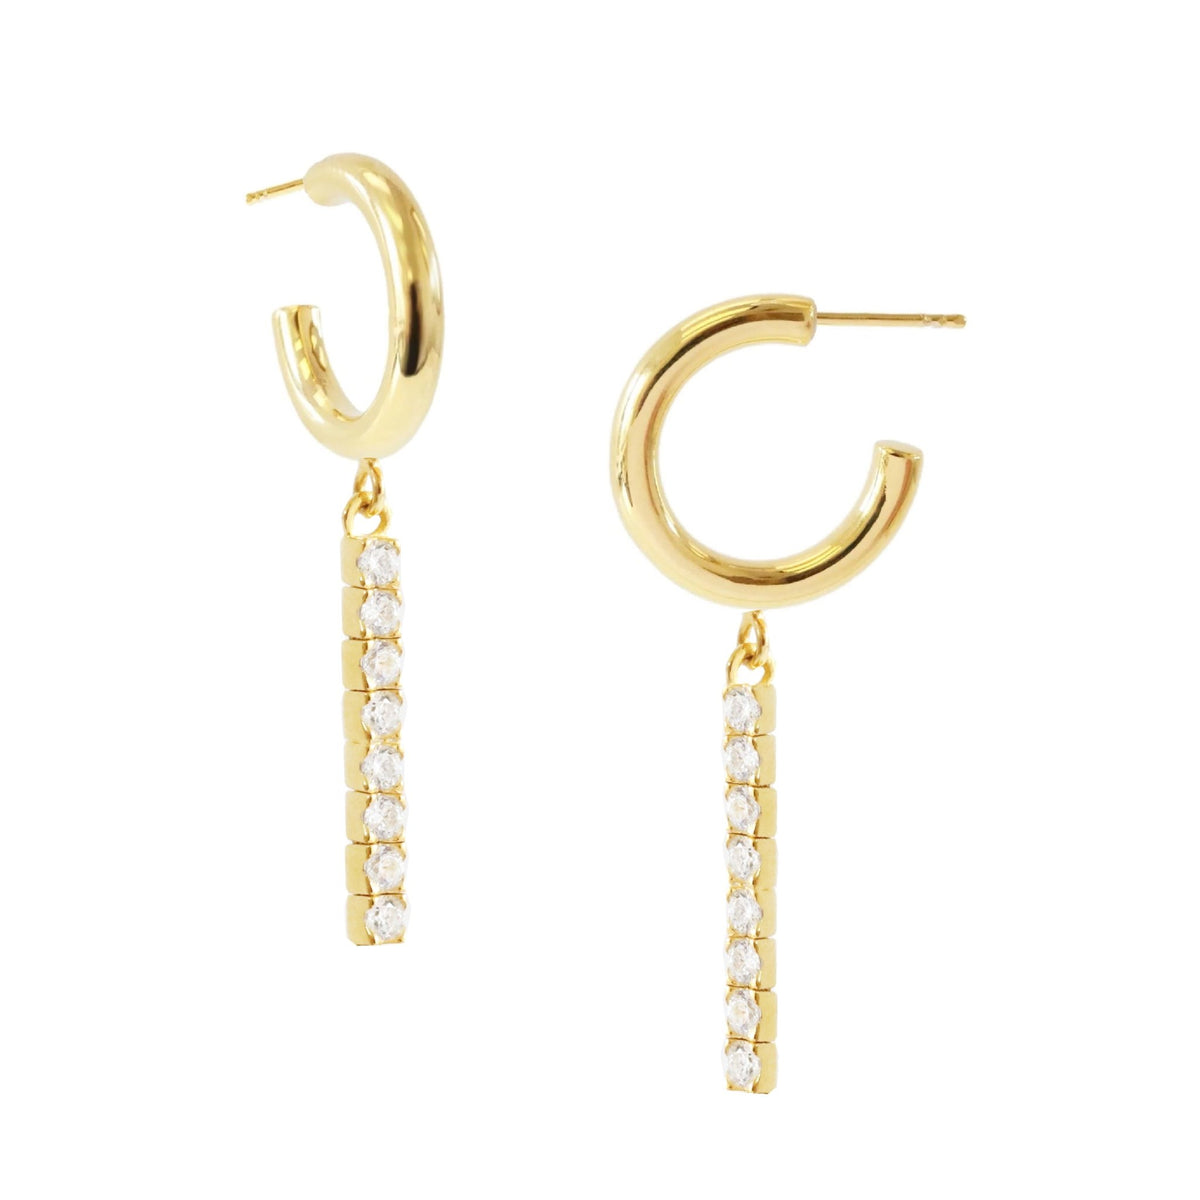 LOVE TENNIS HOOPS - CUBIC ZIRCONIA &amp; GOLD - SO PRETTY CARA COTTER